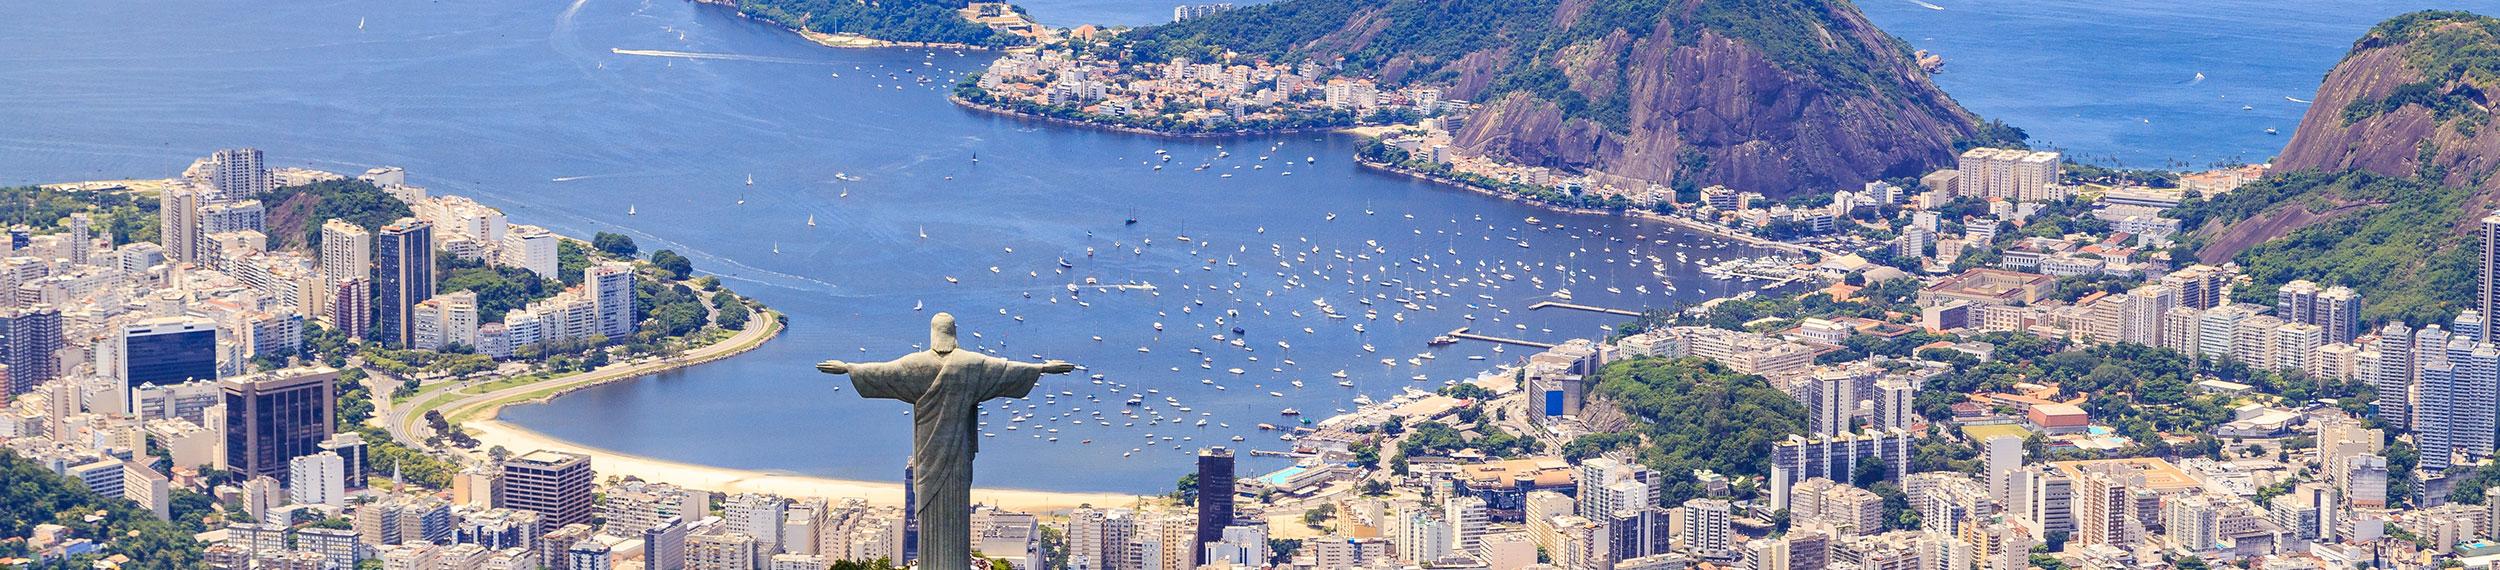 Aerial view of Christ The Redeemer Monument on Corcovado Mountain overlooking the water on a sunny day in Rio de Janeiro, Brazil.